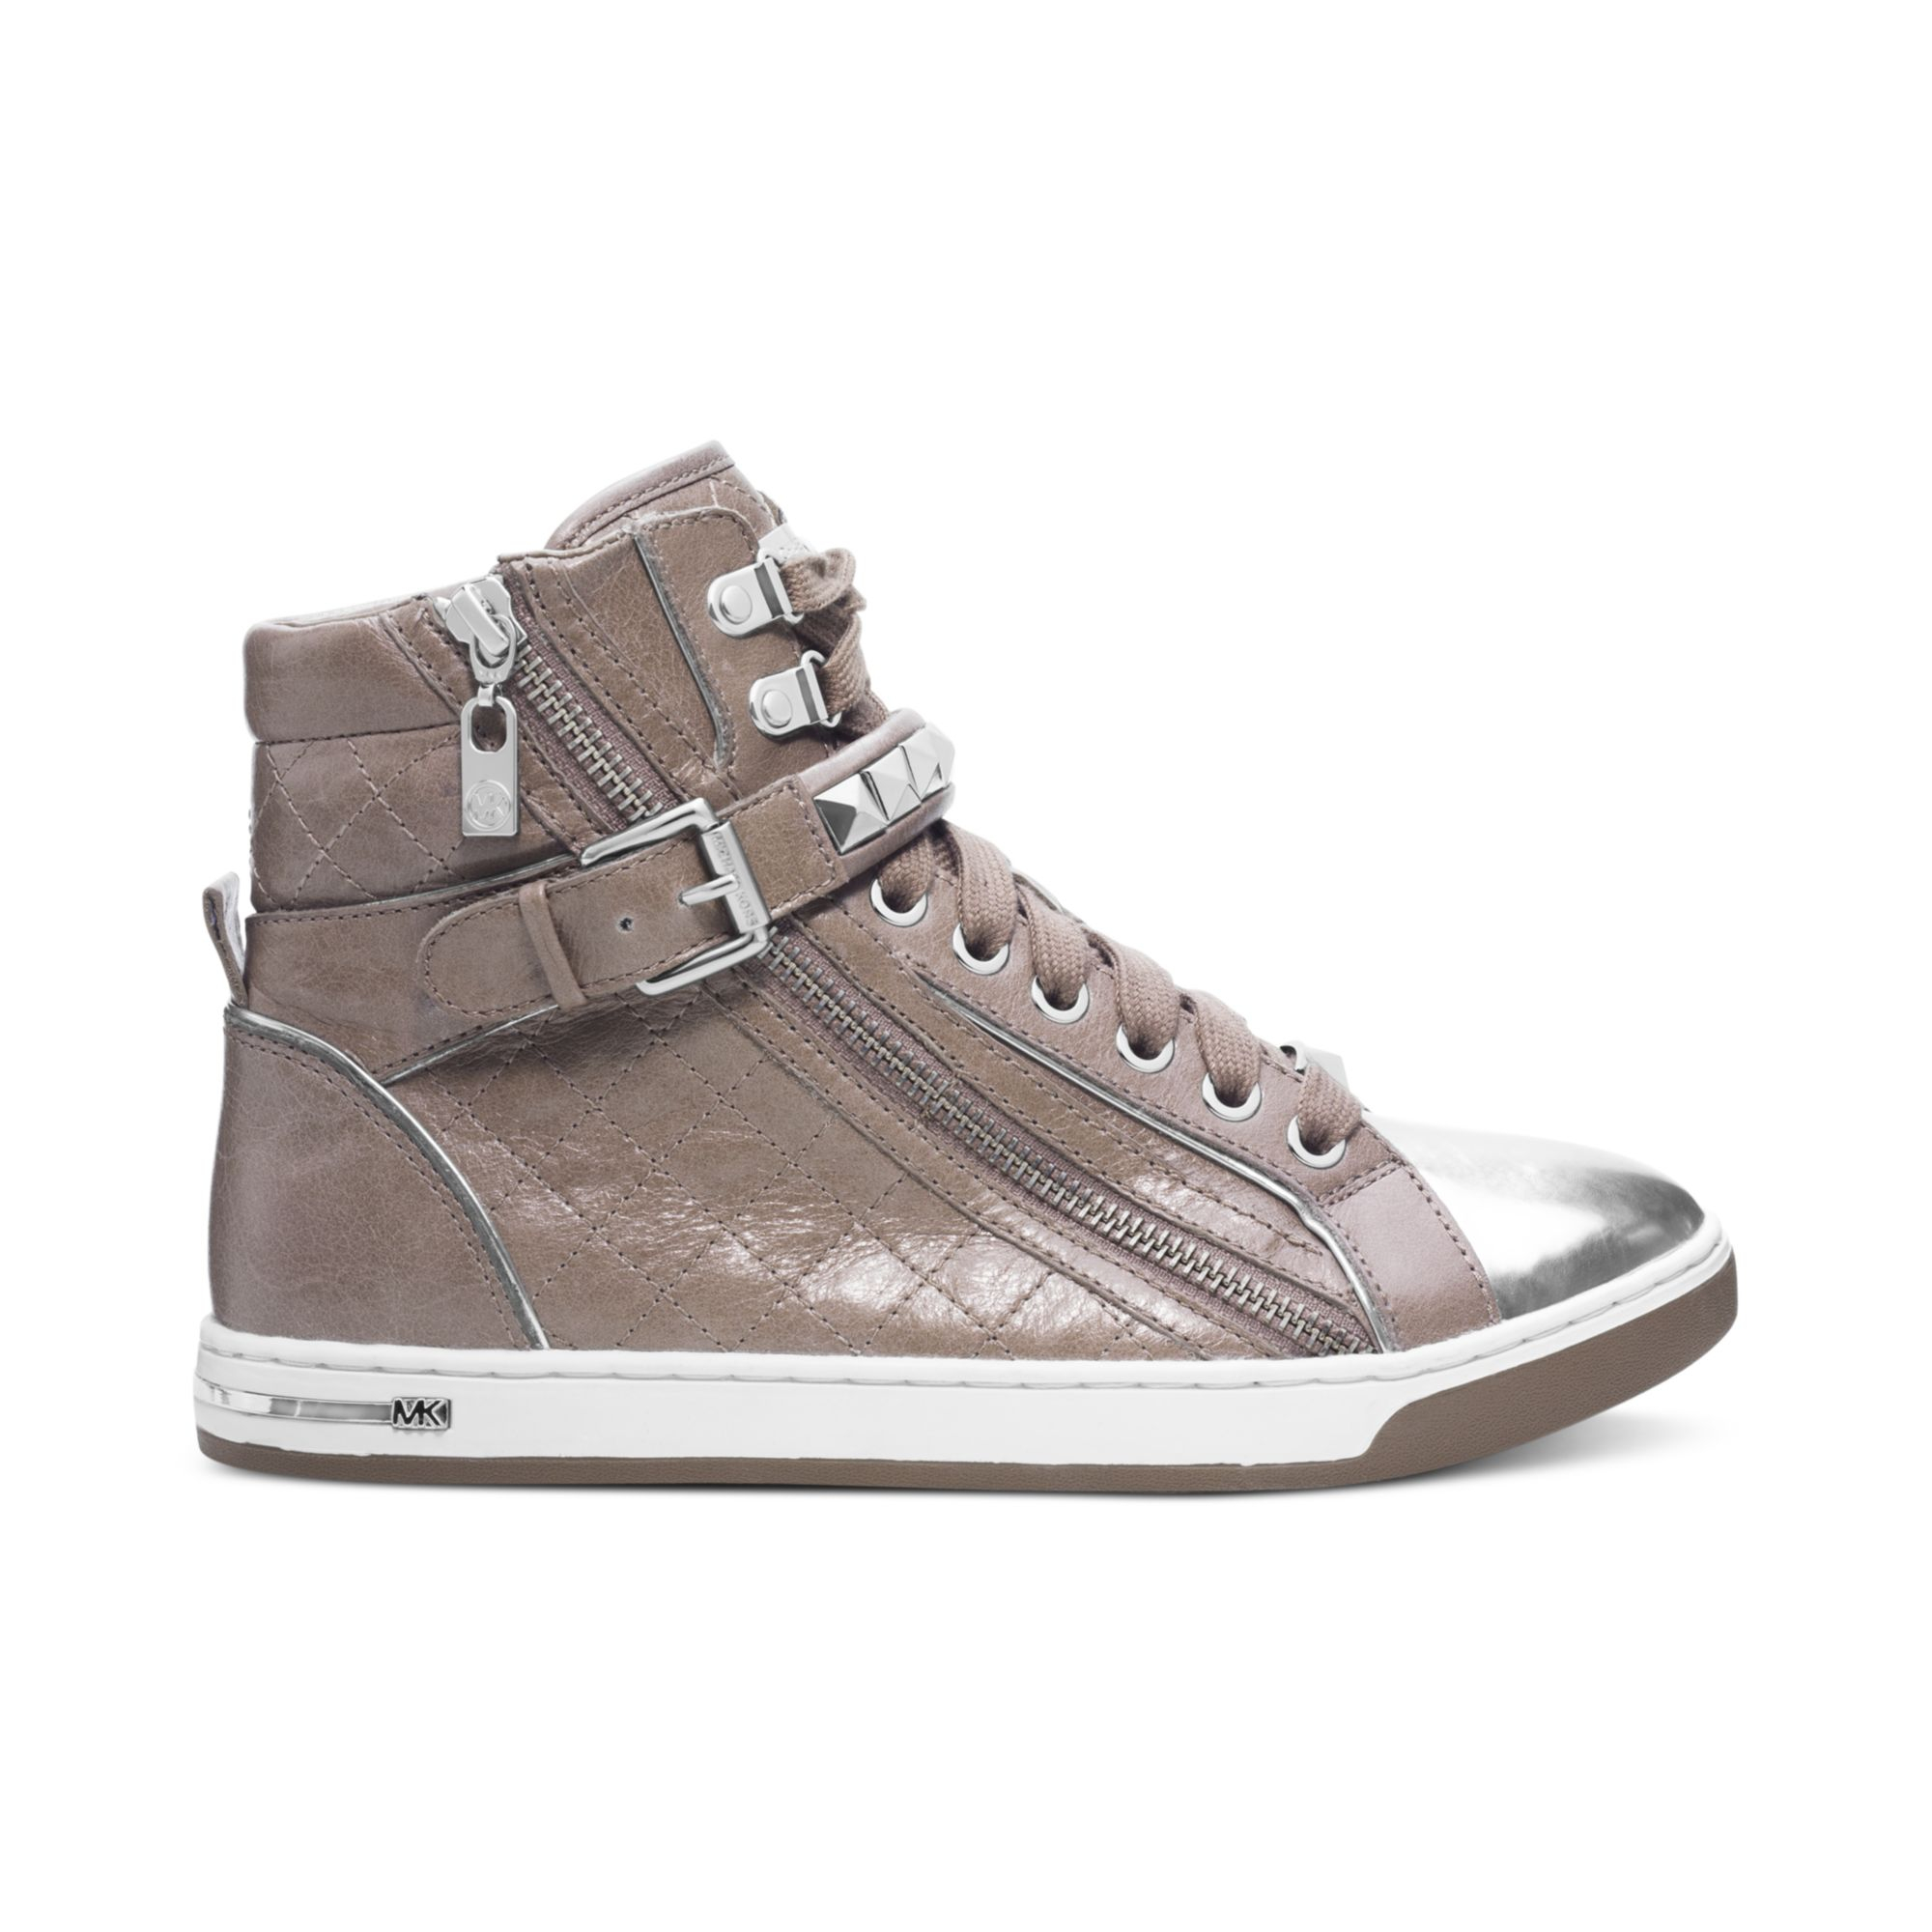 Lyst - Michael Kors Michael Glam Studded High Top Sneakers in Natural